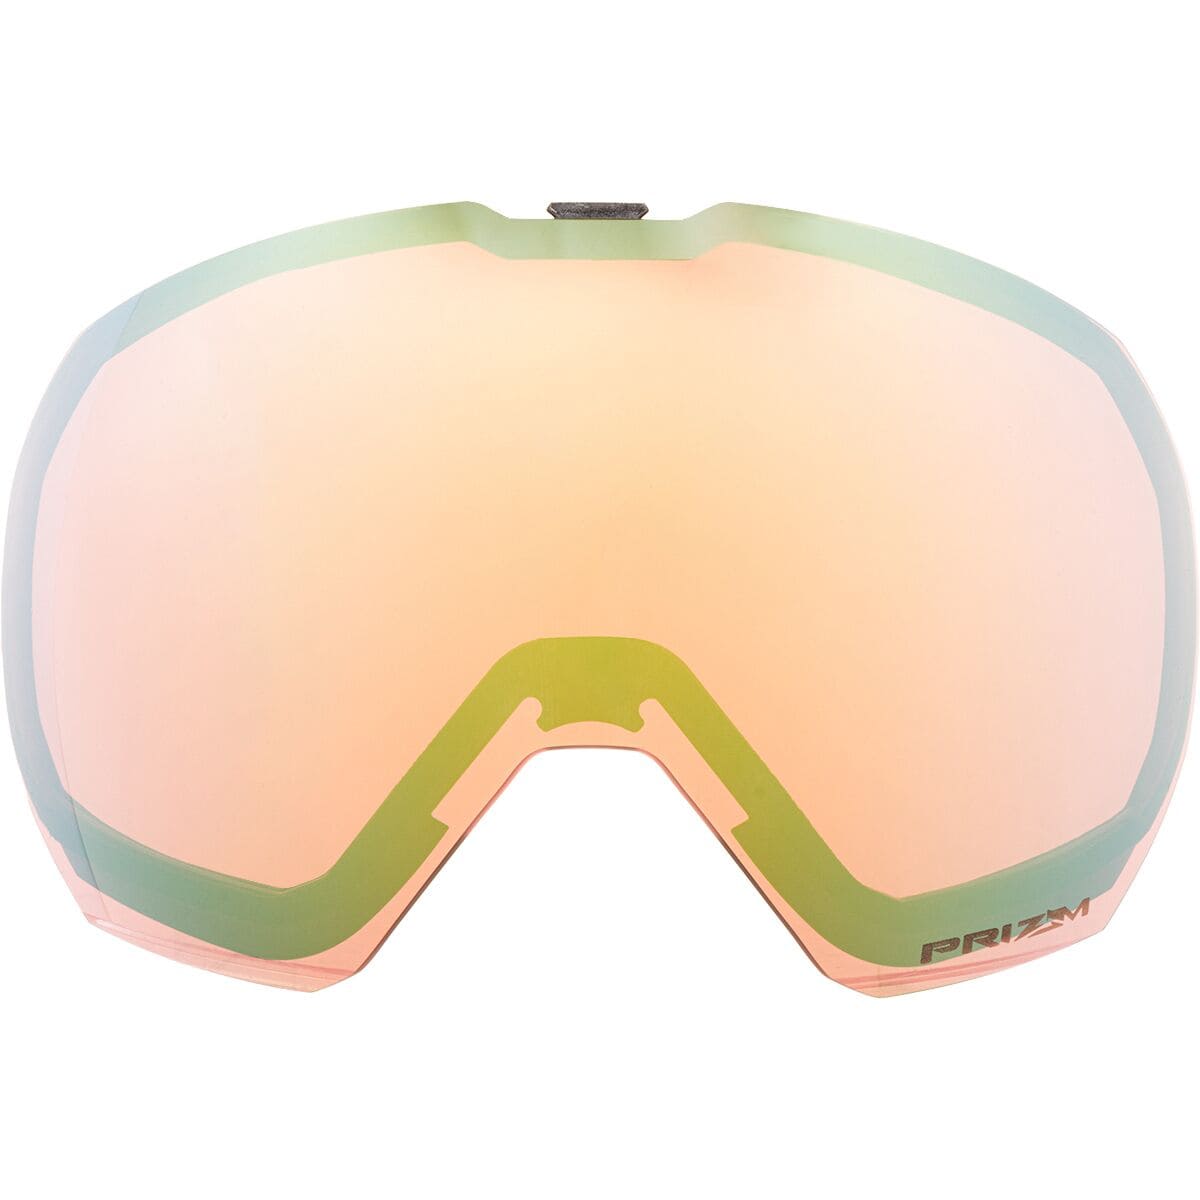 Oakley Flight Path XL Goggles Replacement Lens